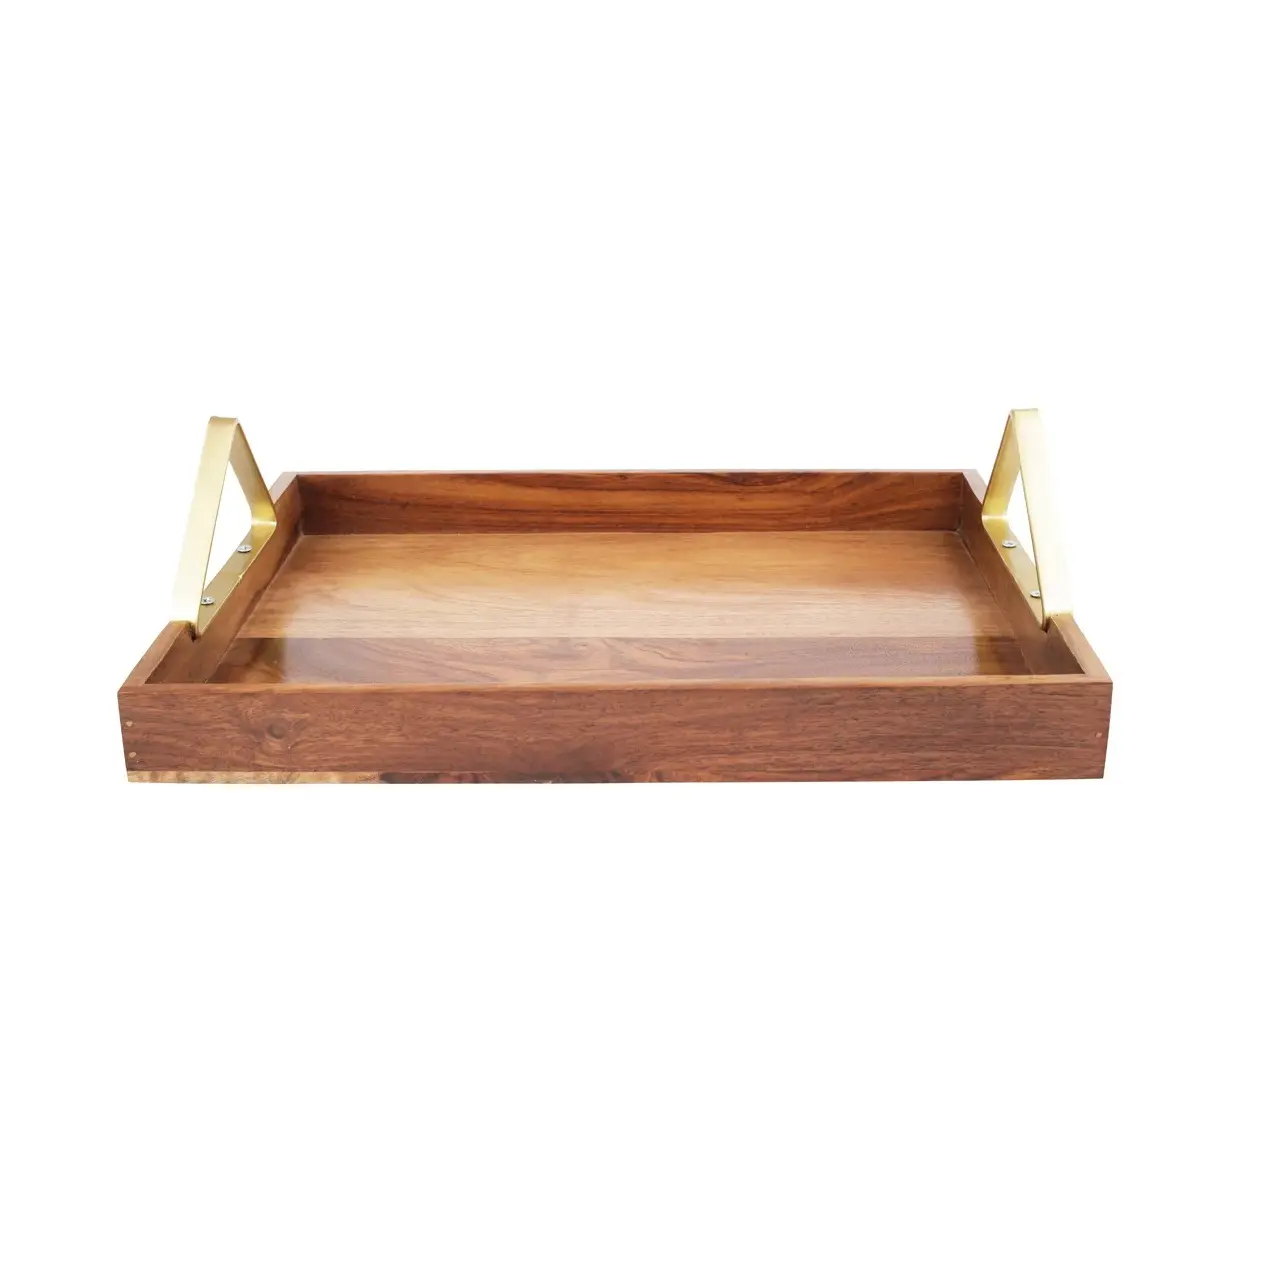 Wholesale Wooden Tray Handmade Serving Tray With Handle Available At Bulk Price Wooden Serving Tray for Sale